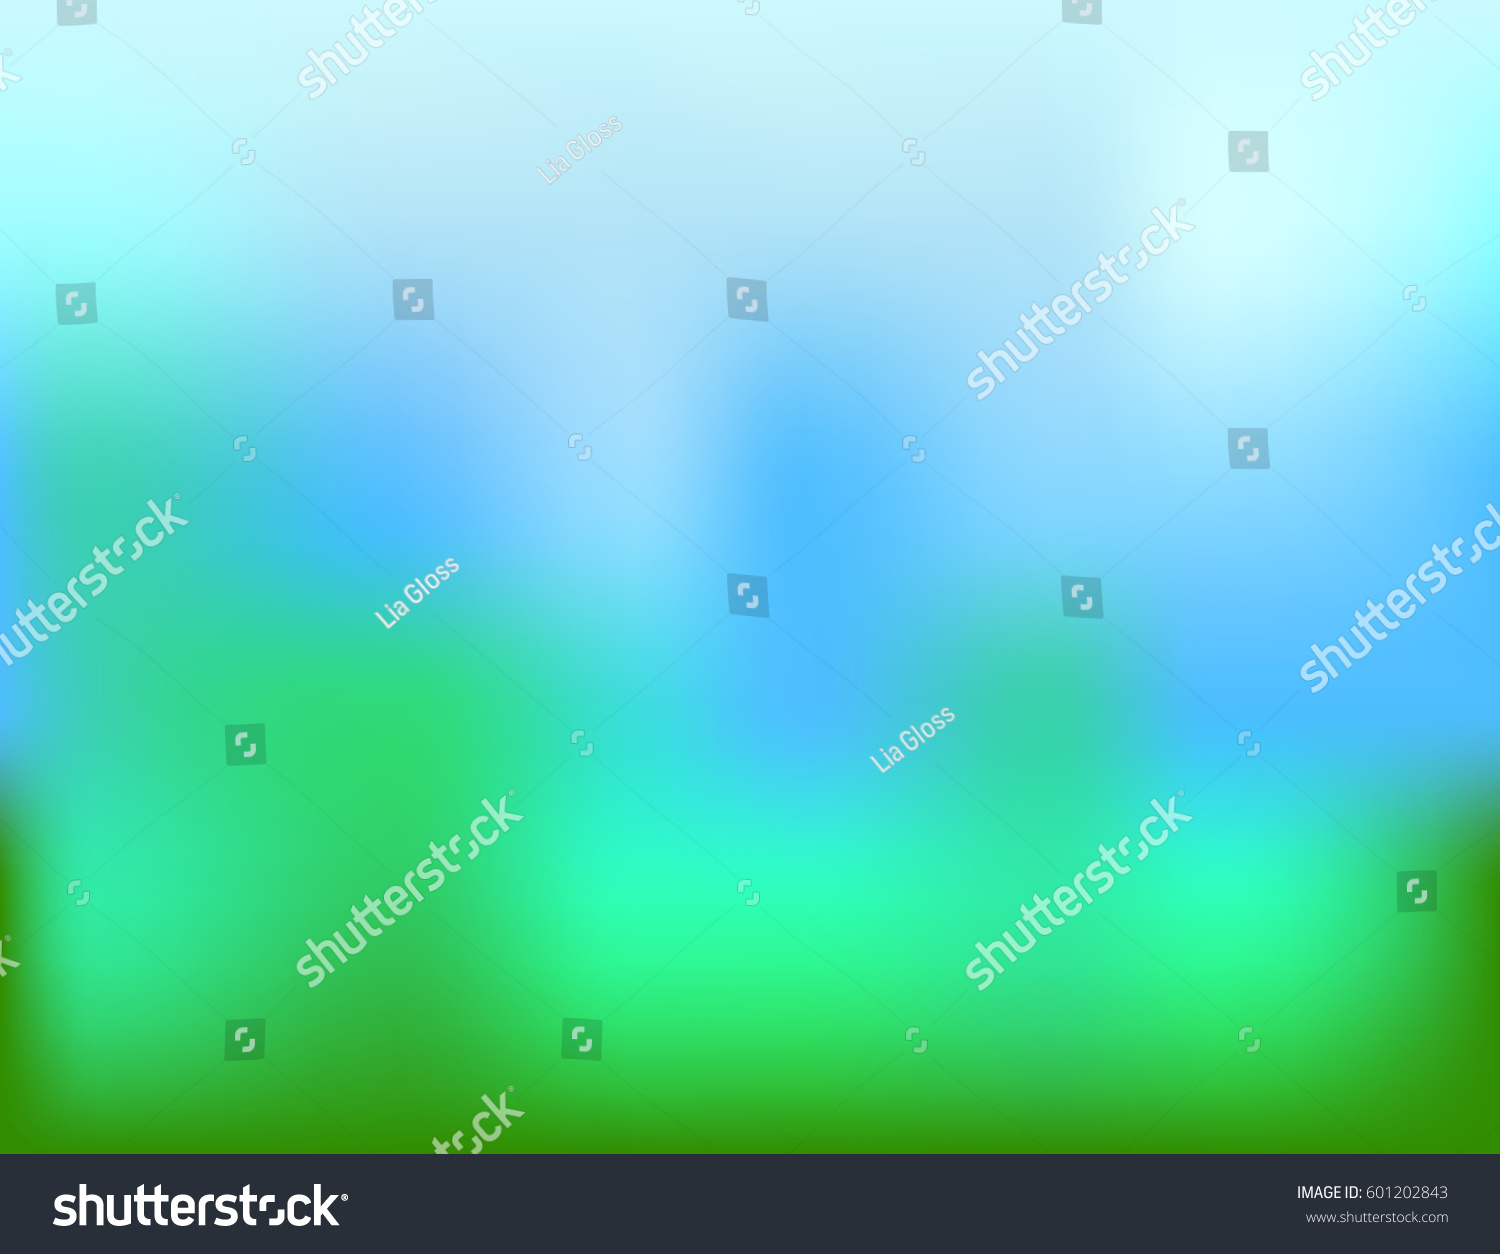 Abstract Green Blue White Blurred Gradient Stock Vector (Royalty Free ...